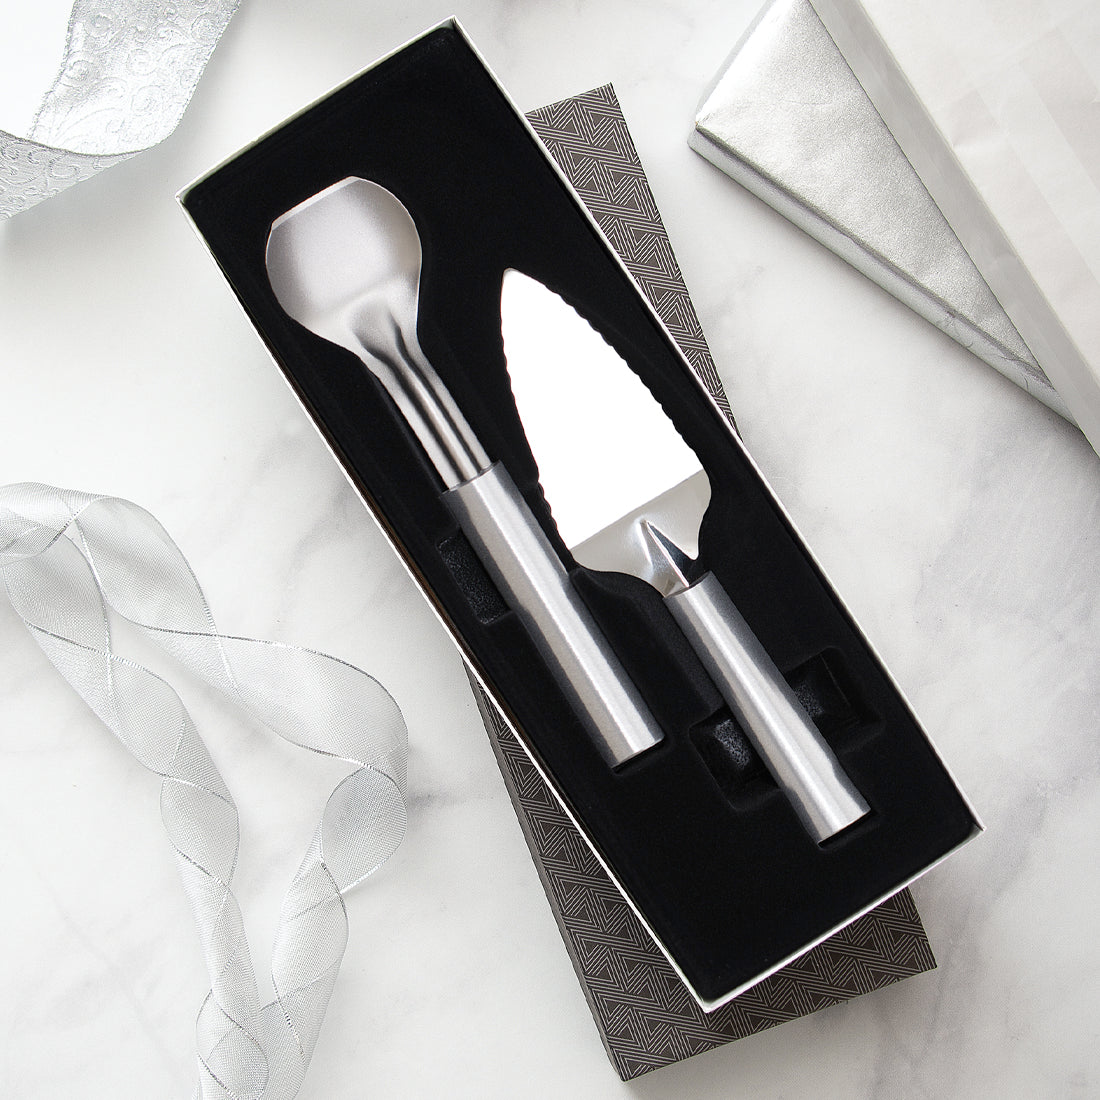 Rada Cutlery Pie A'La Mode Gift Set with silver handles in a gift box